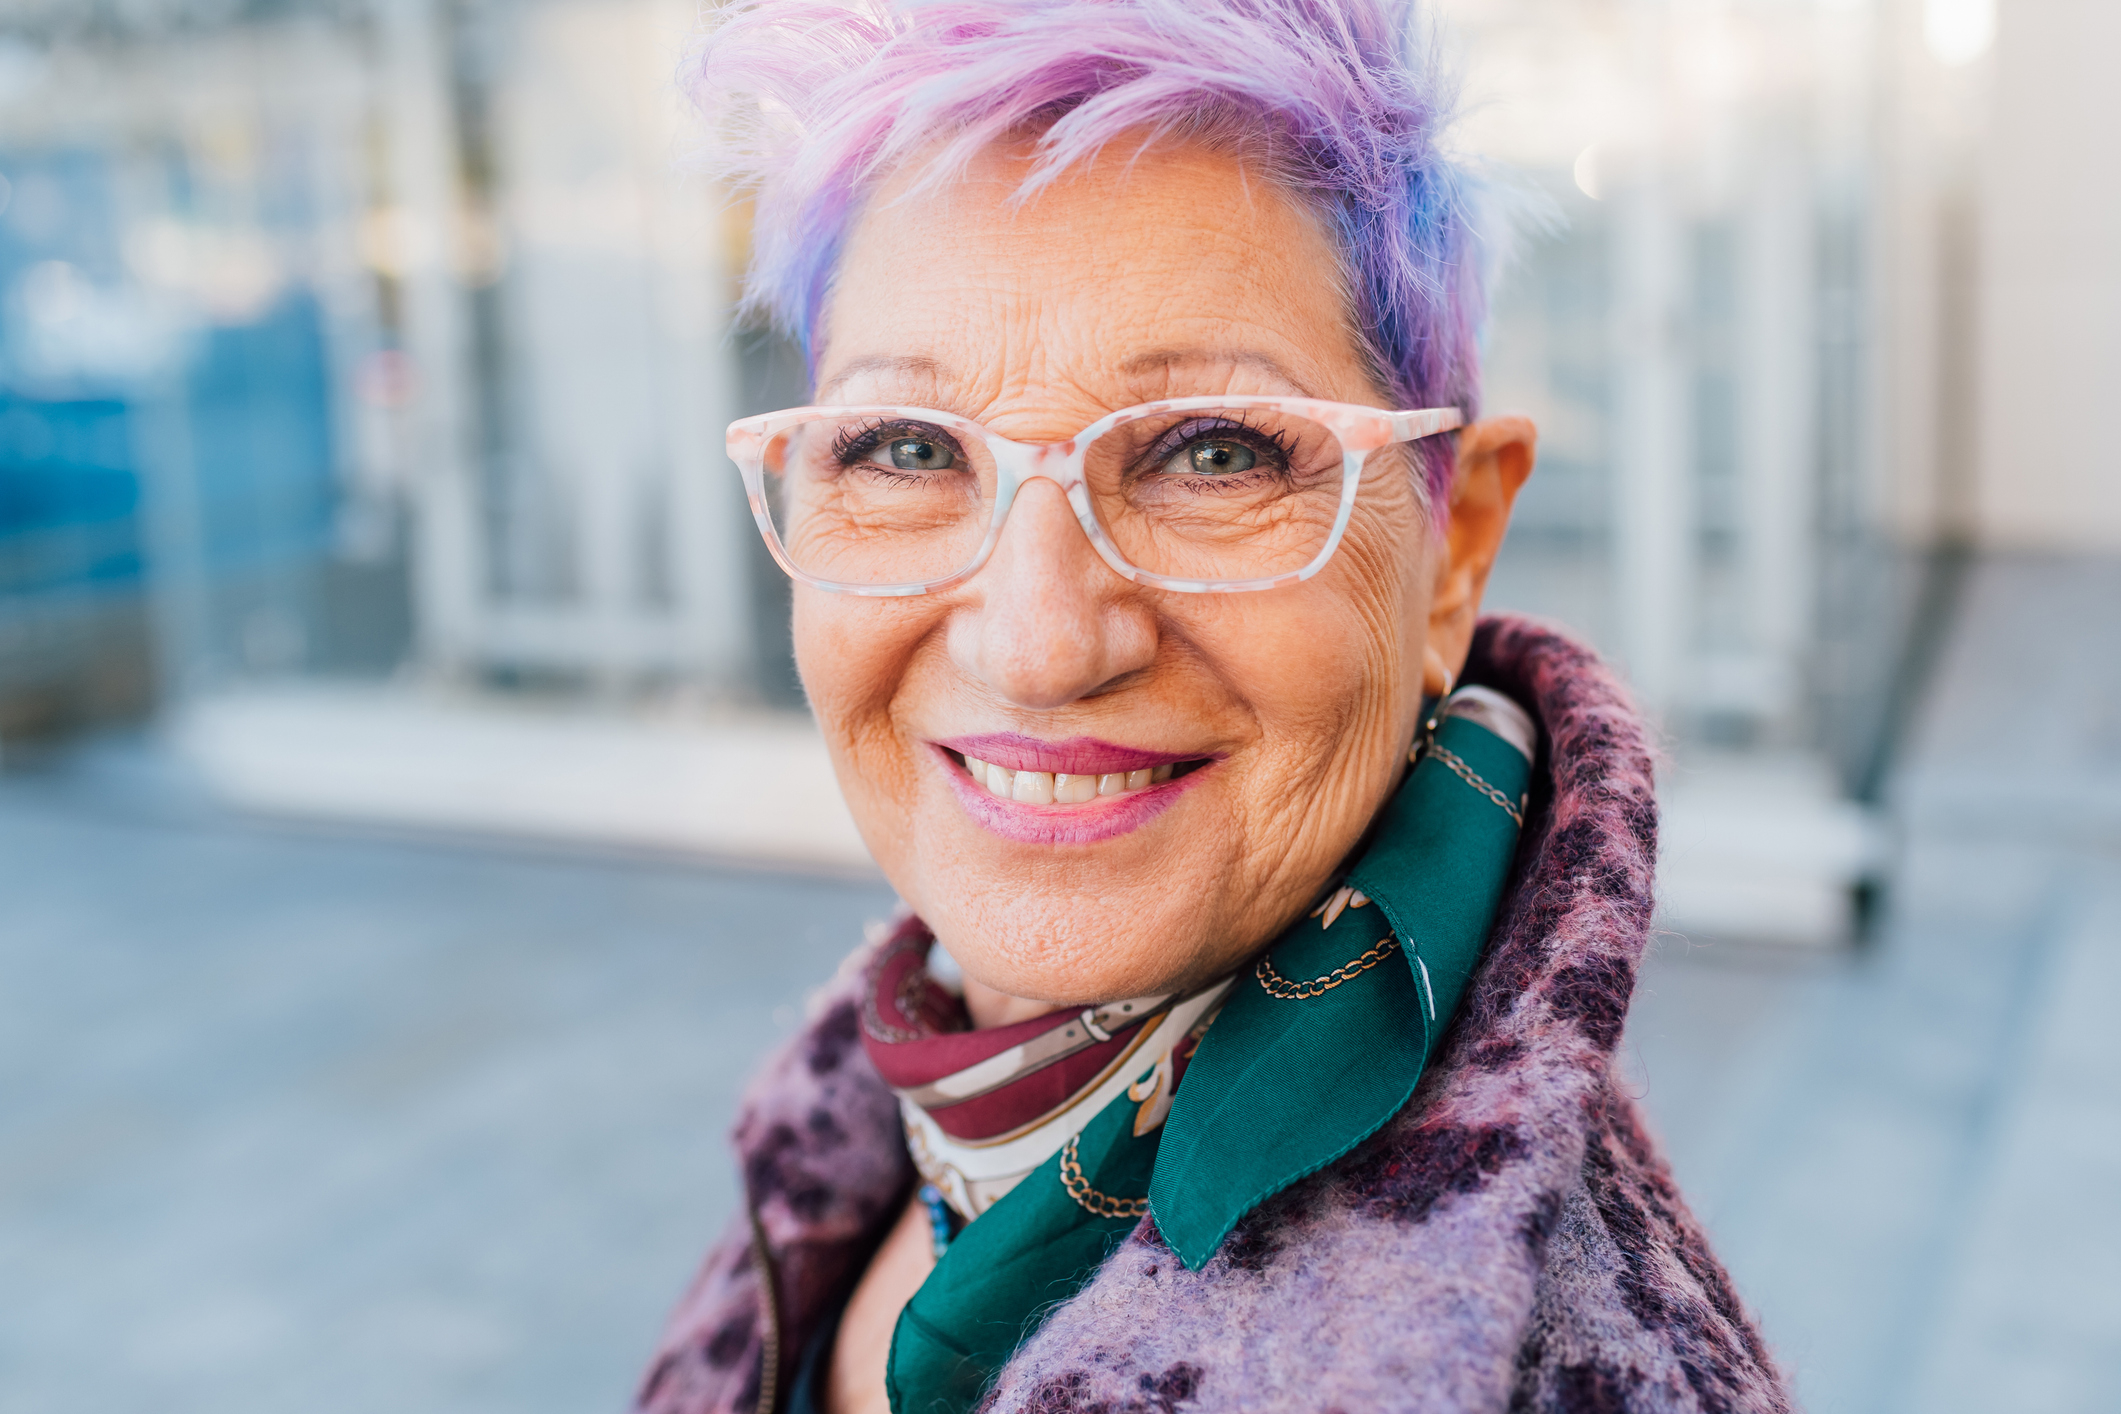 Elderly woman with purple hair wearing glasses and a scarf smiling at the camera